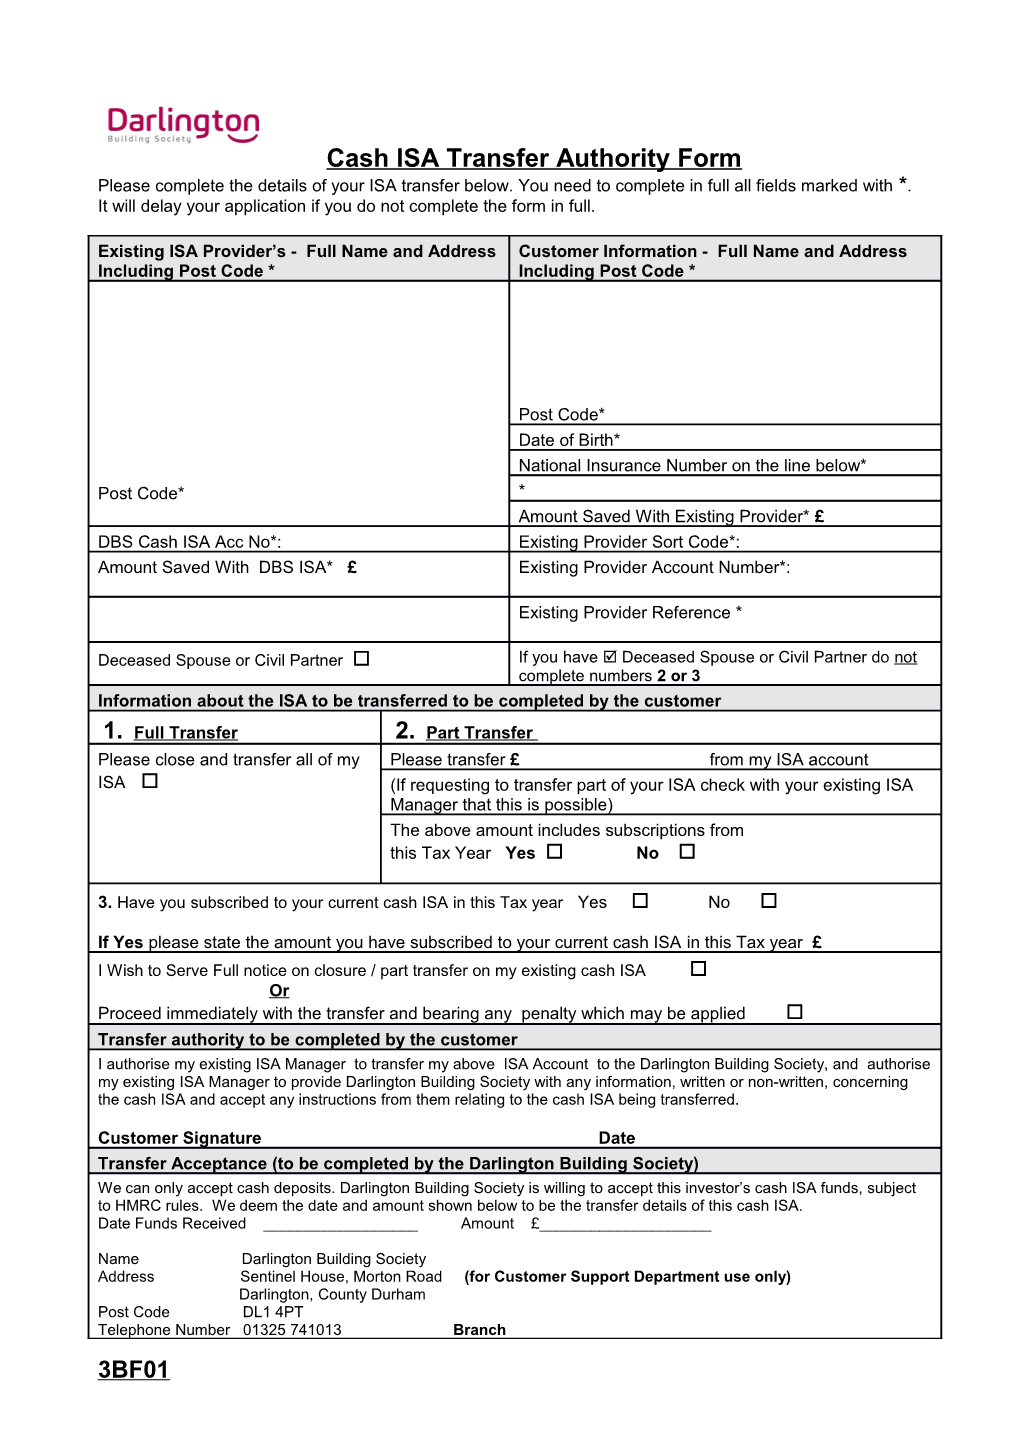 Cash ISA Transfer Authority Form